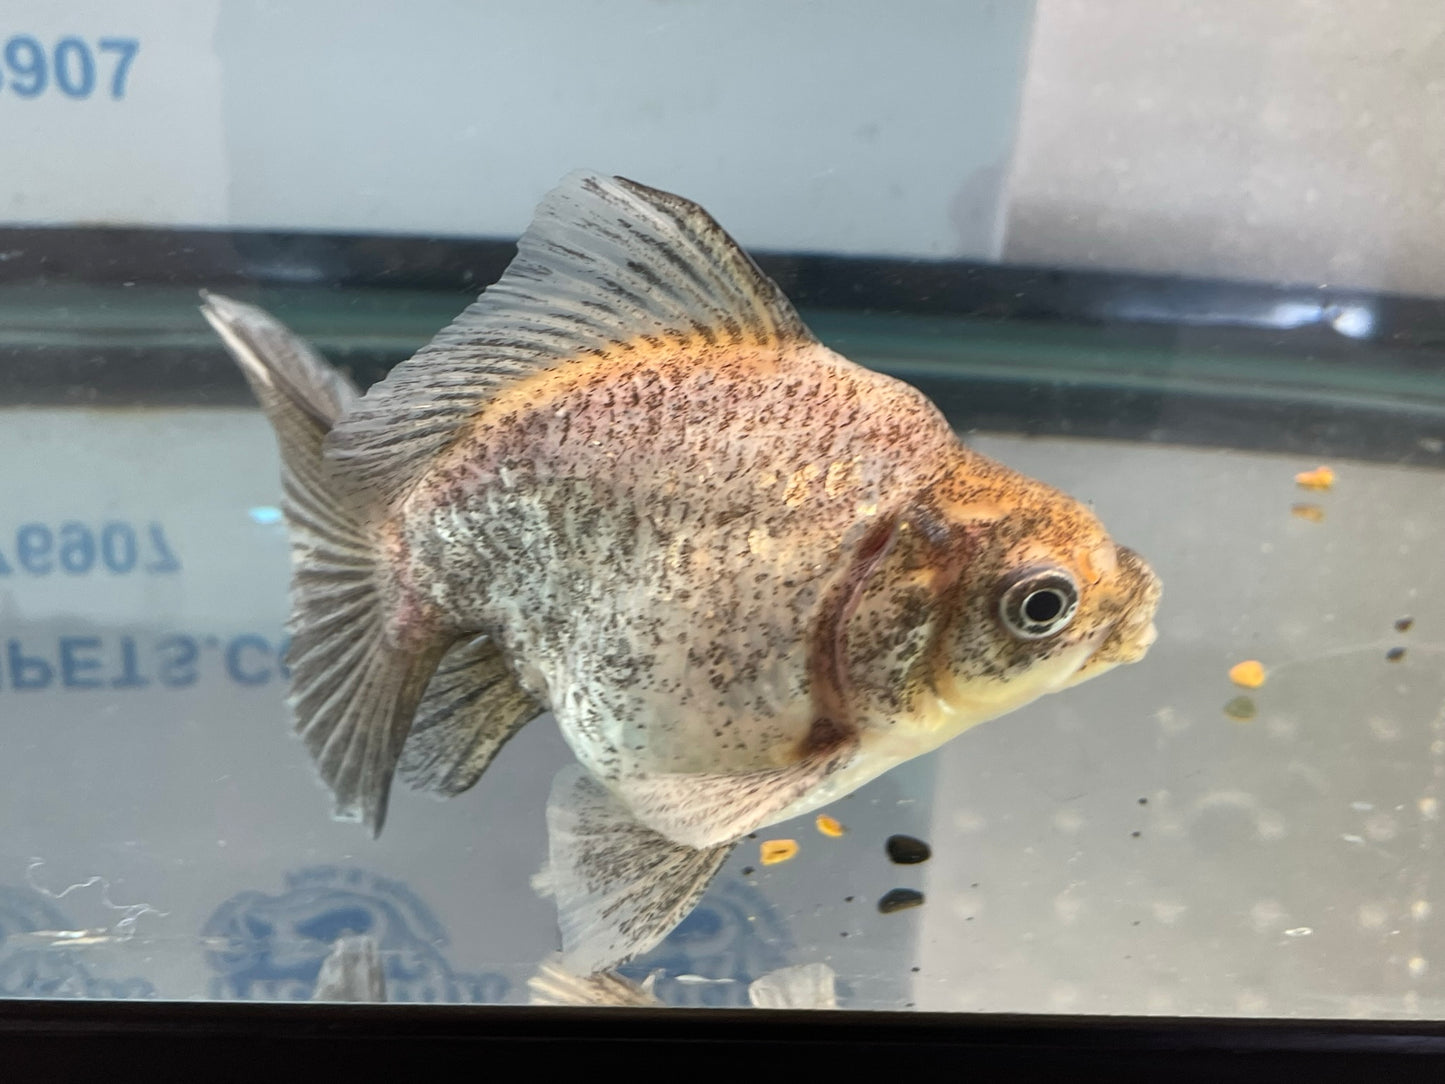 Short Tail Ryukin 12-13cm Fancy Goldfish (Fish in Picture)